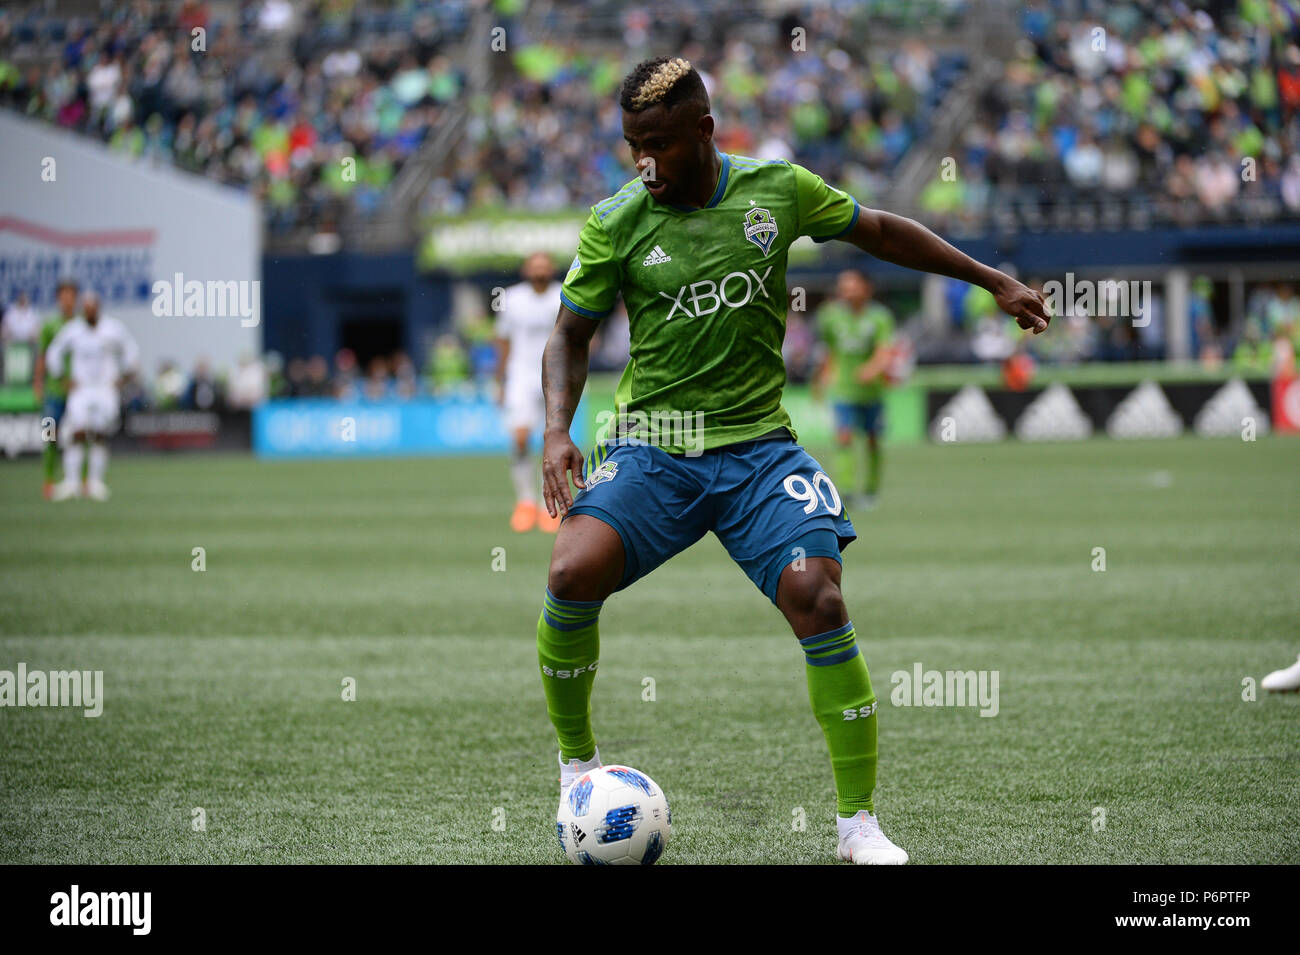 Seattle, Washington, USA. 30th June, 2018. Sounder WAYLON FRANCIS (90) in action as the Portland Timbers play the Seattle Sounders in a Western Conference match at Century Link Field in Seattle, WA. Credit: Jeff Halstead/ZUMA Wire/Alamy Live News Stock Photo